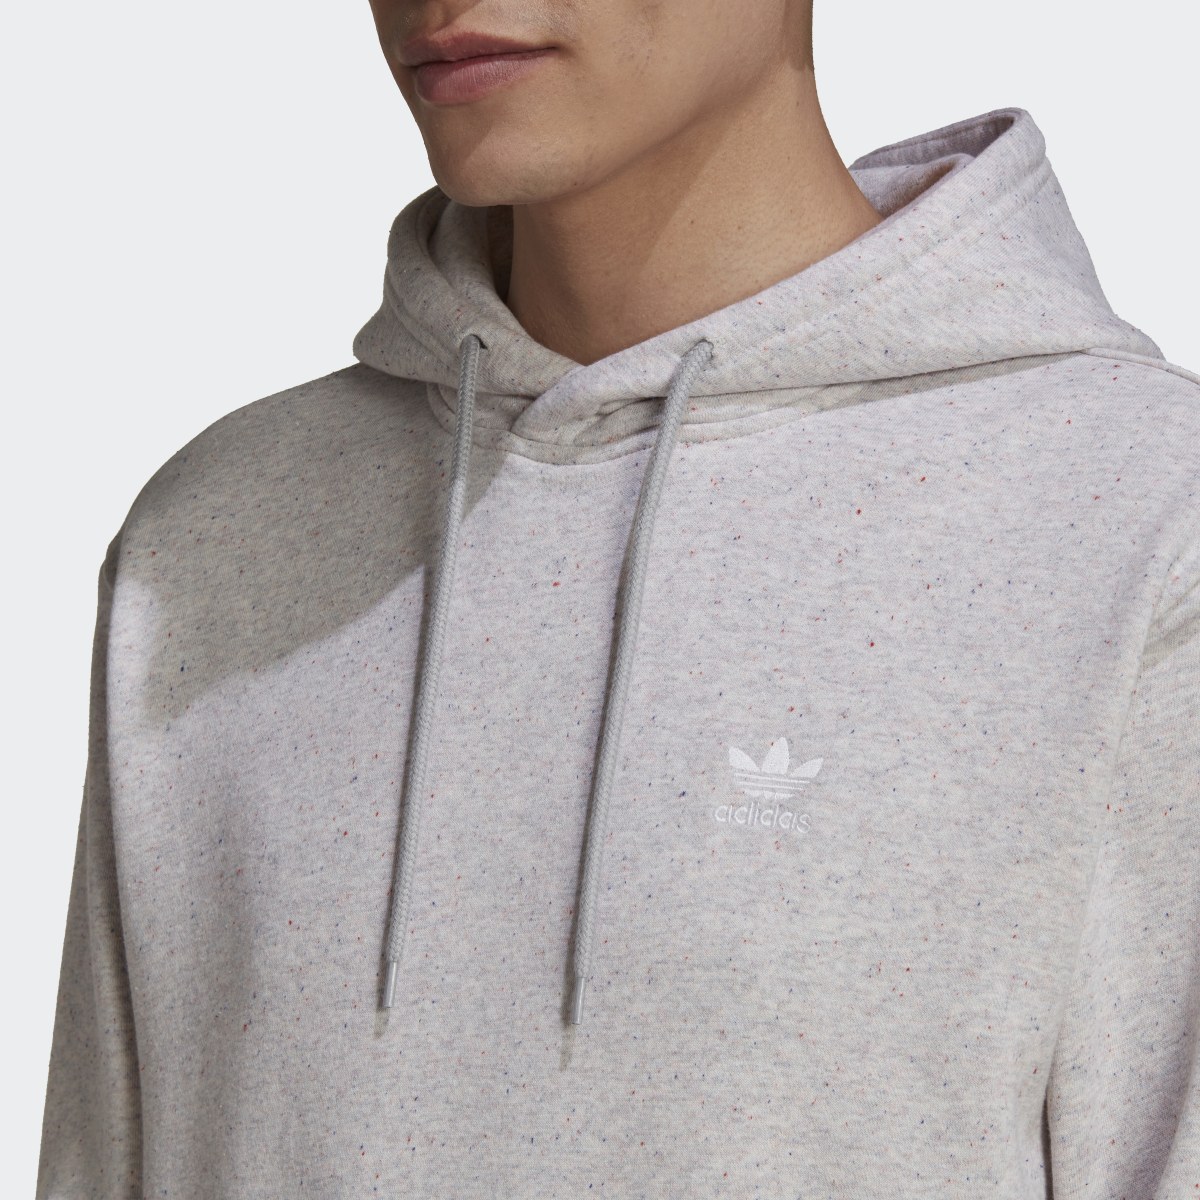 Adidas Essentials+ Made with Nature Hoodie. 6